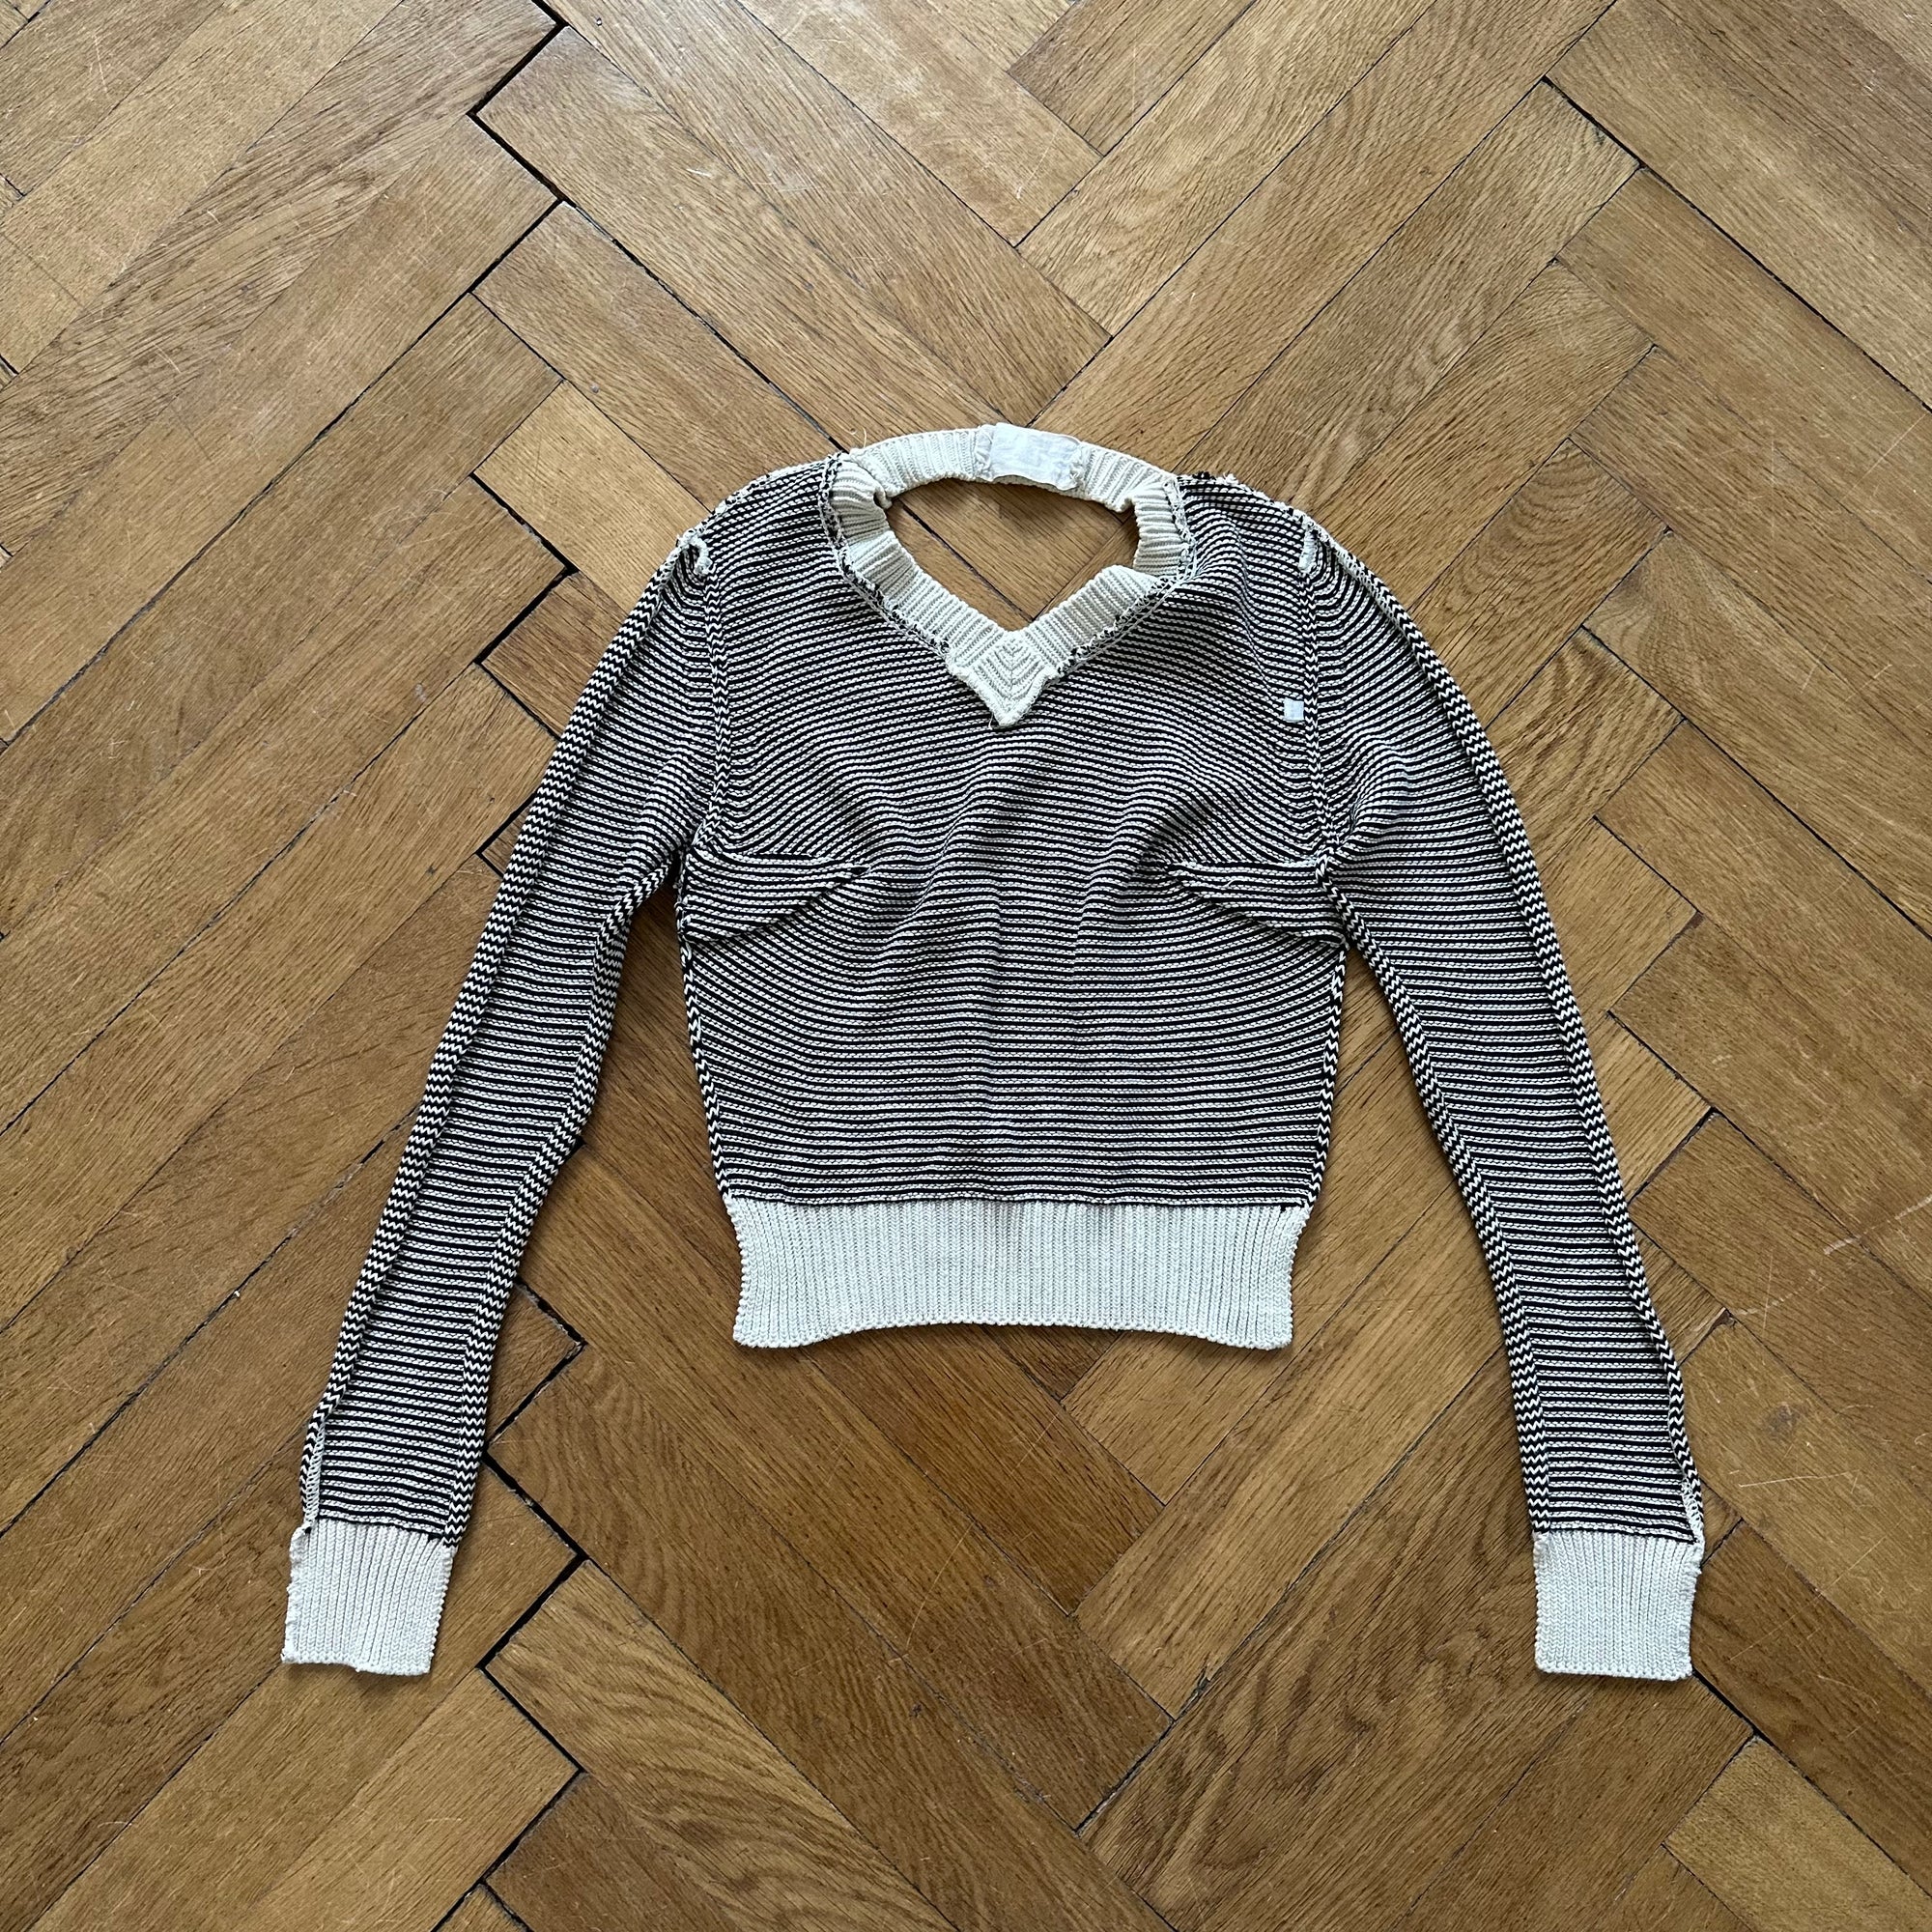 Maison Martin Margiela SS96 One Layer Front Wrap Knit Top